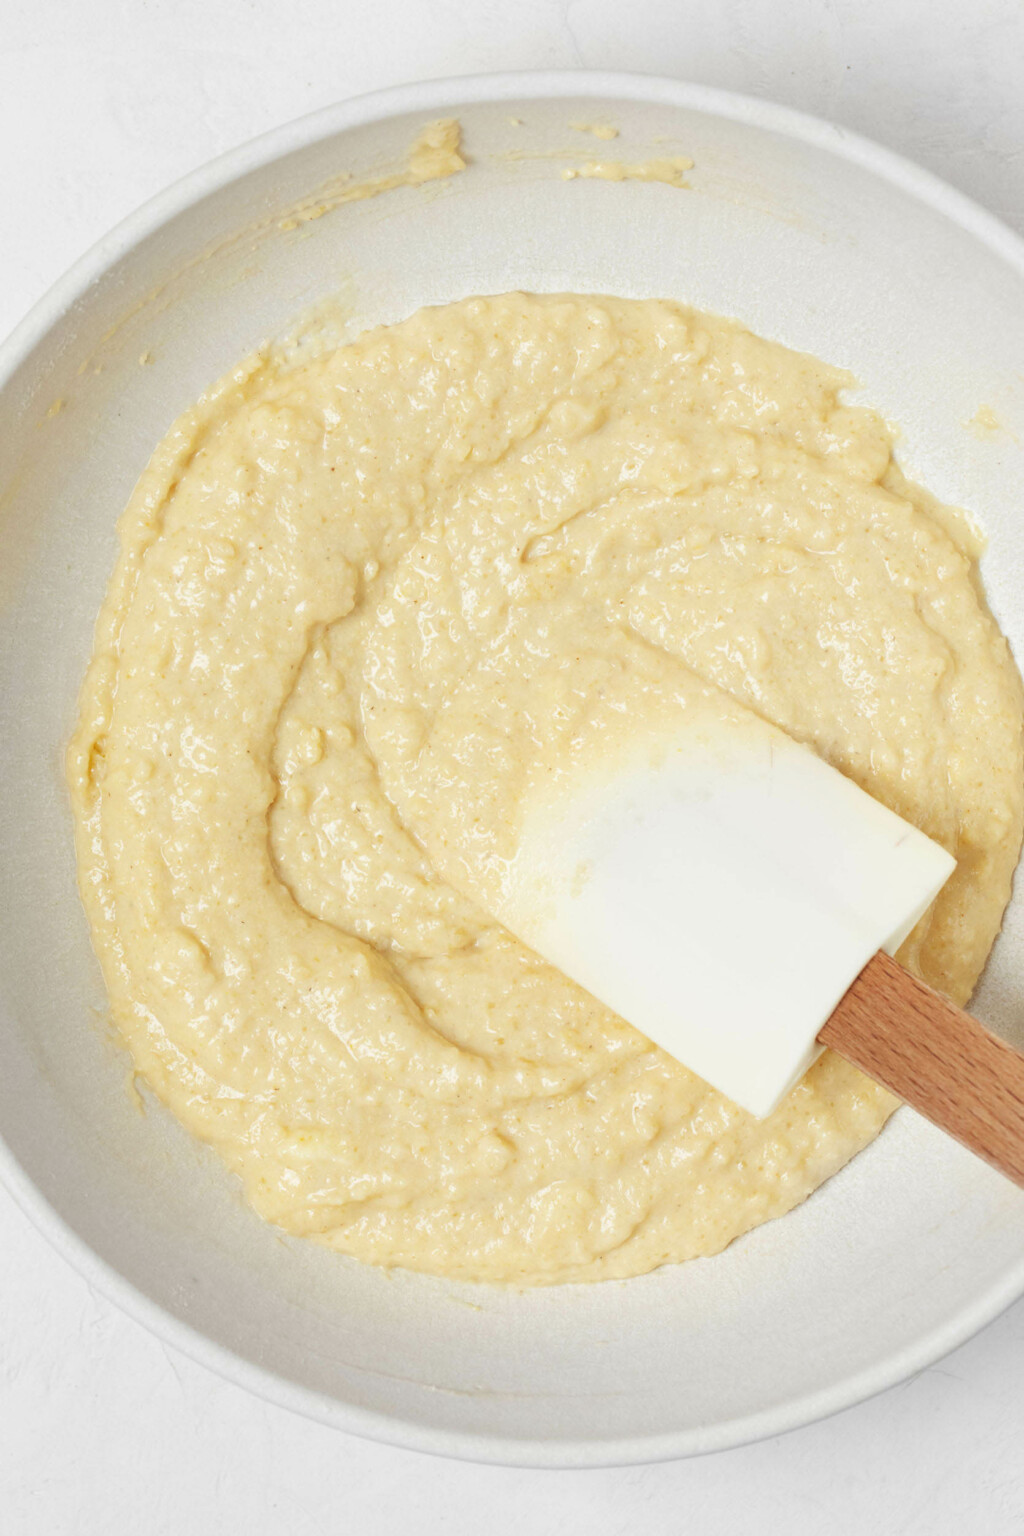 A pale yellow, thick cake batter is being mixed in a white mixing bowl.